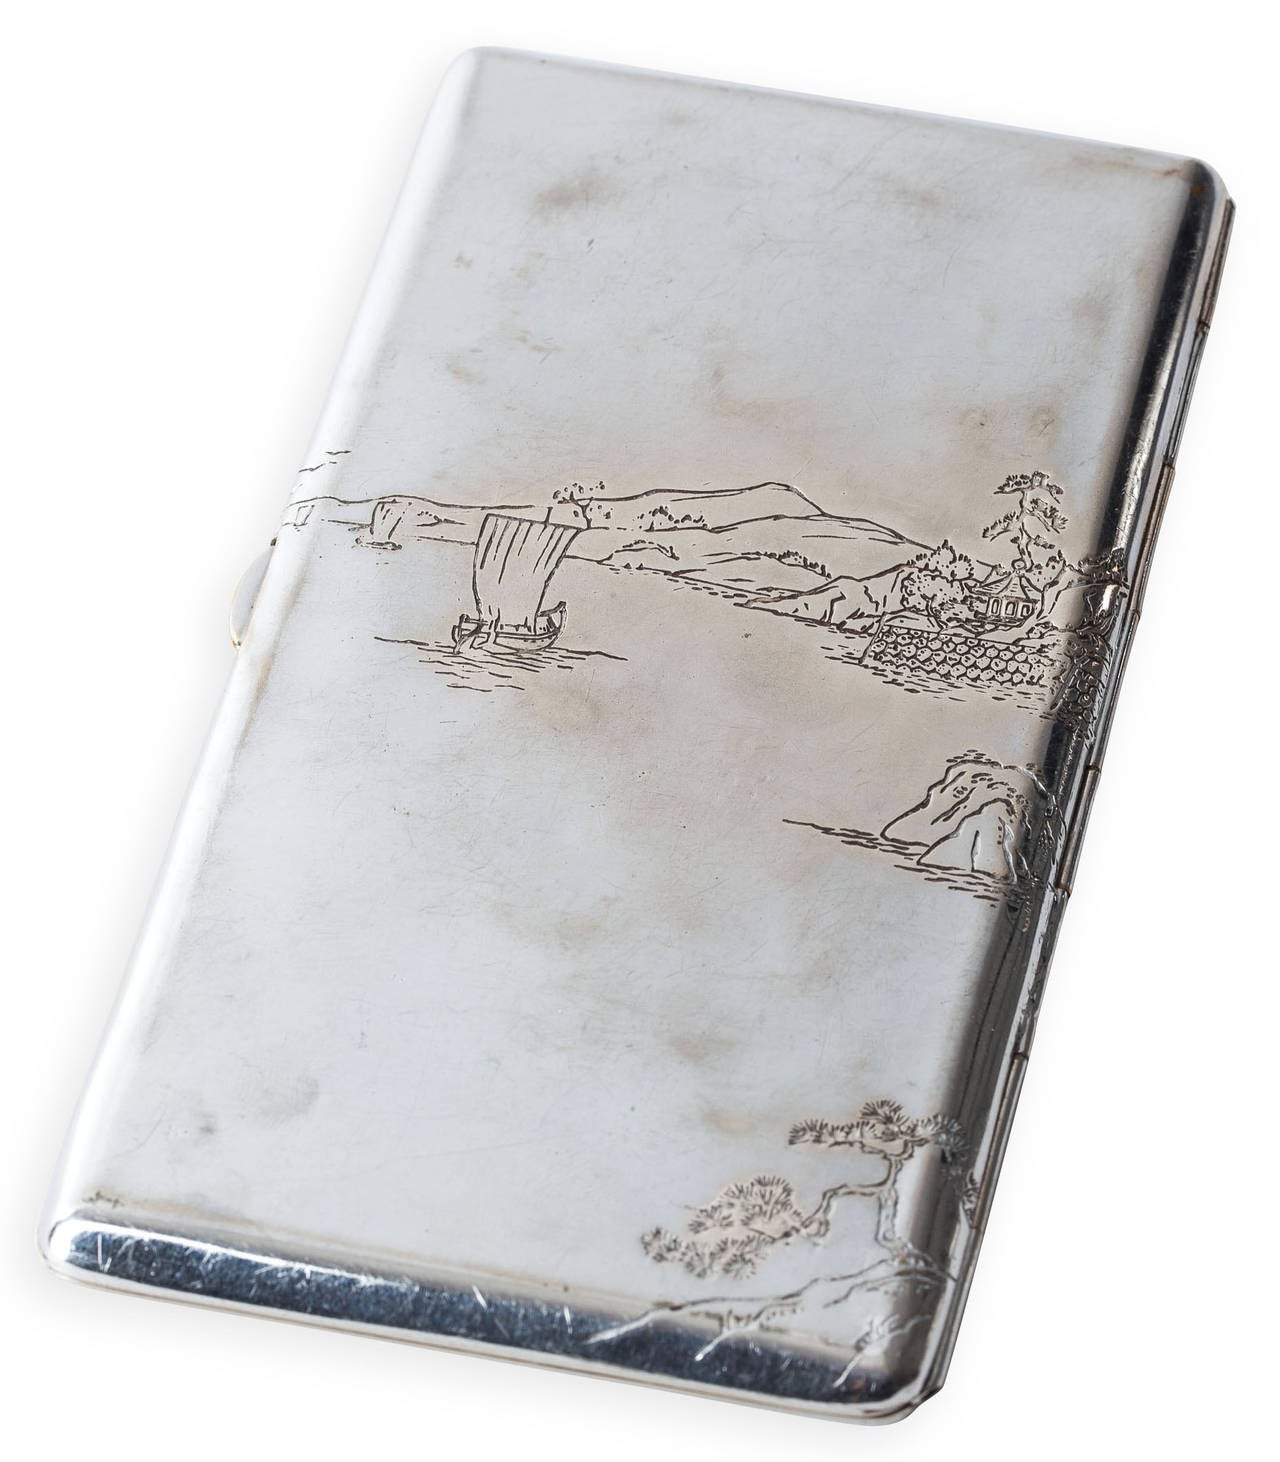 Japanese incised sterling silver scenic cigarette case. The design has applied oxidized copper over silver with gold highlights. The case demonstrates the Japanese ability to combine different metals on silver. Silver spring loaded chain keeps